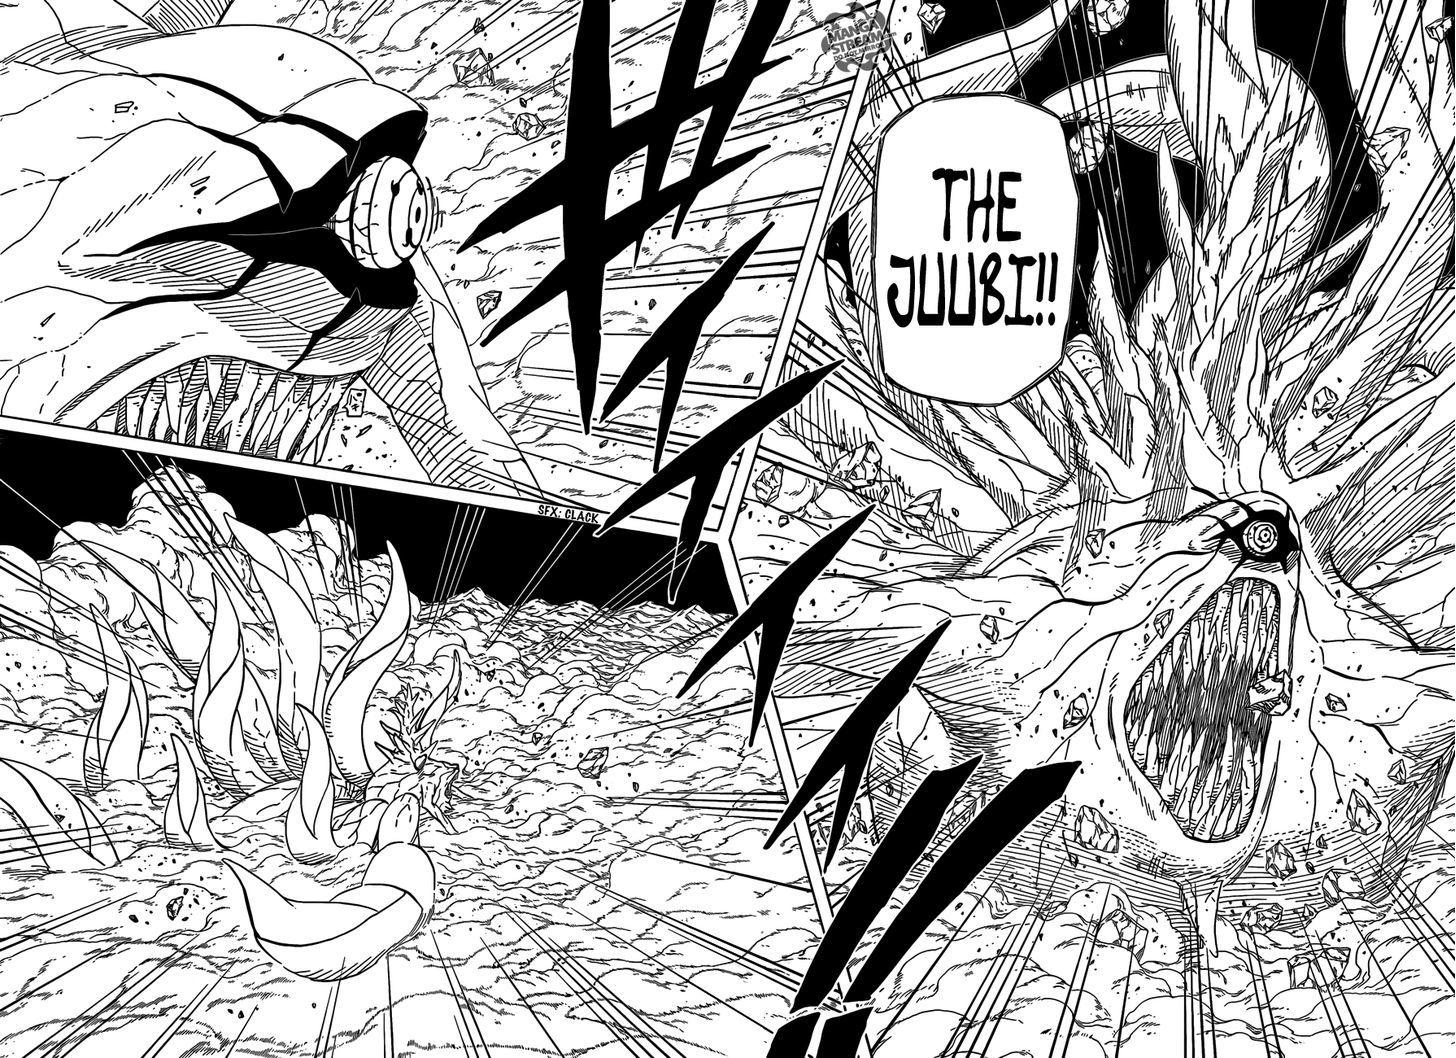 Vol.64 Chapter 610 – Ten- Tails | 2 page